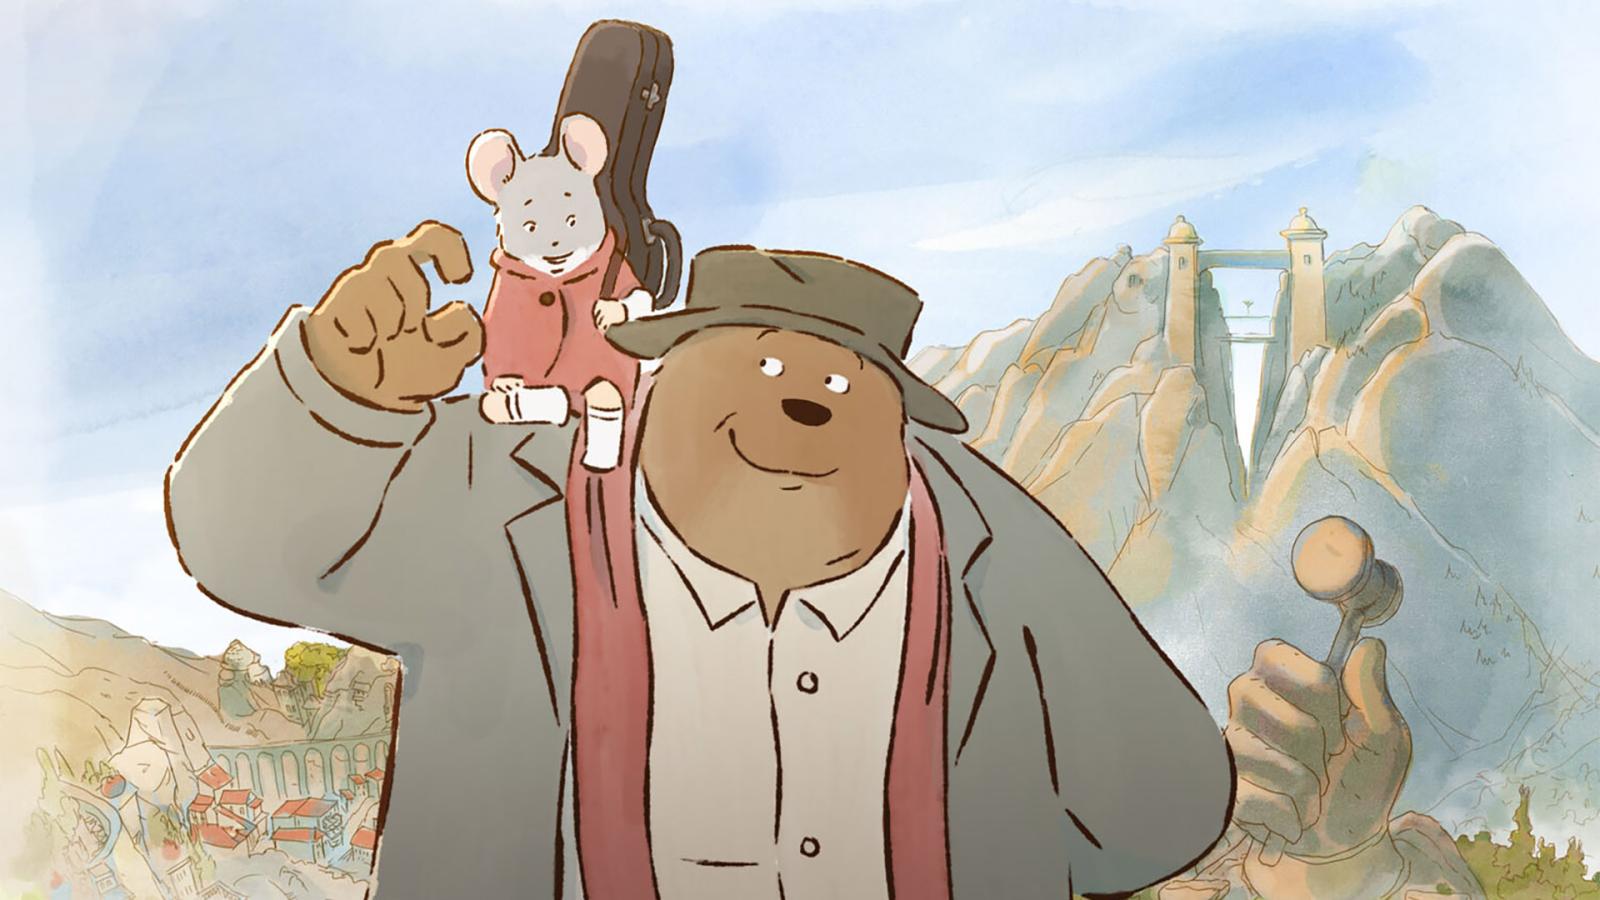 12 Underrated Animated Films Every Adult Should See - image 9